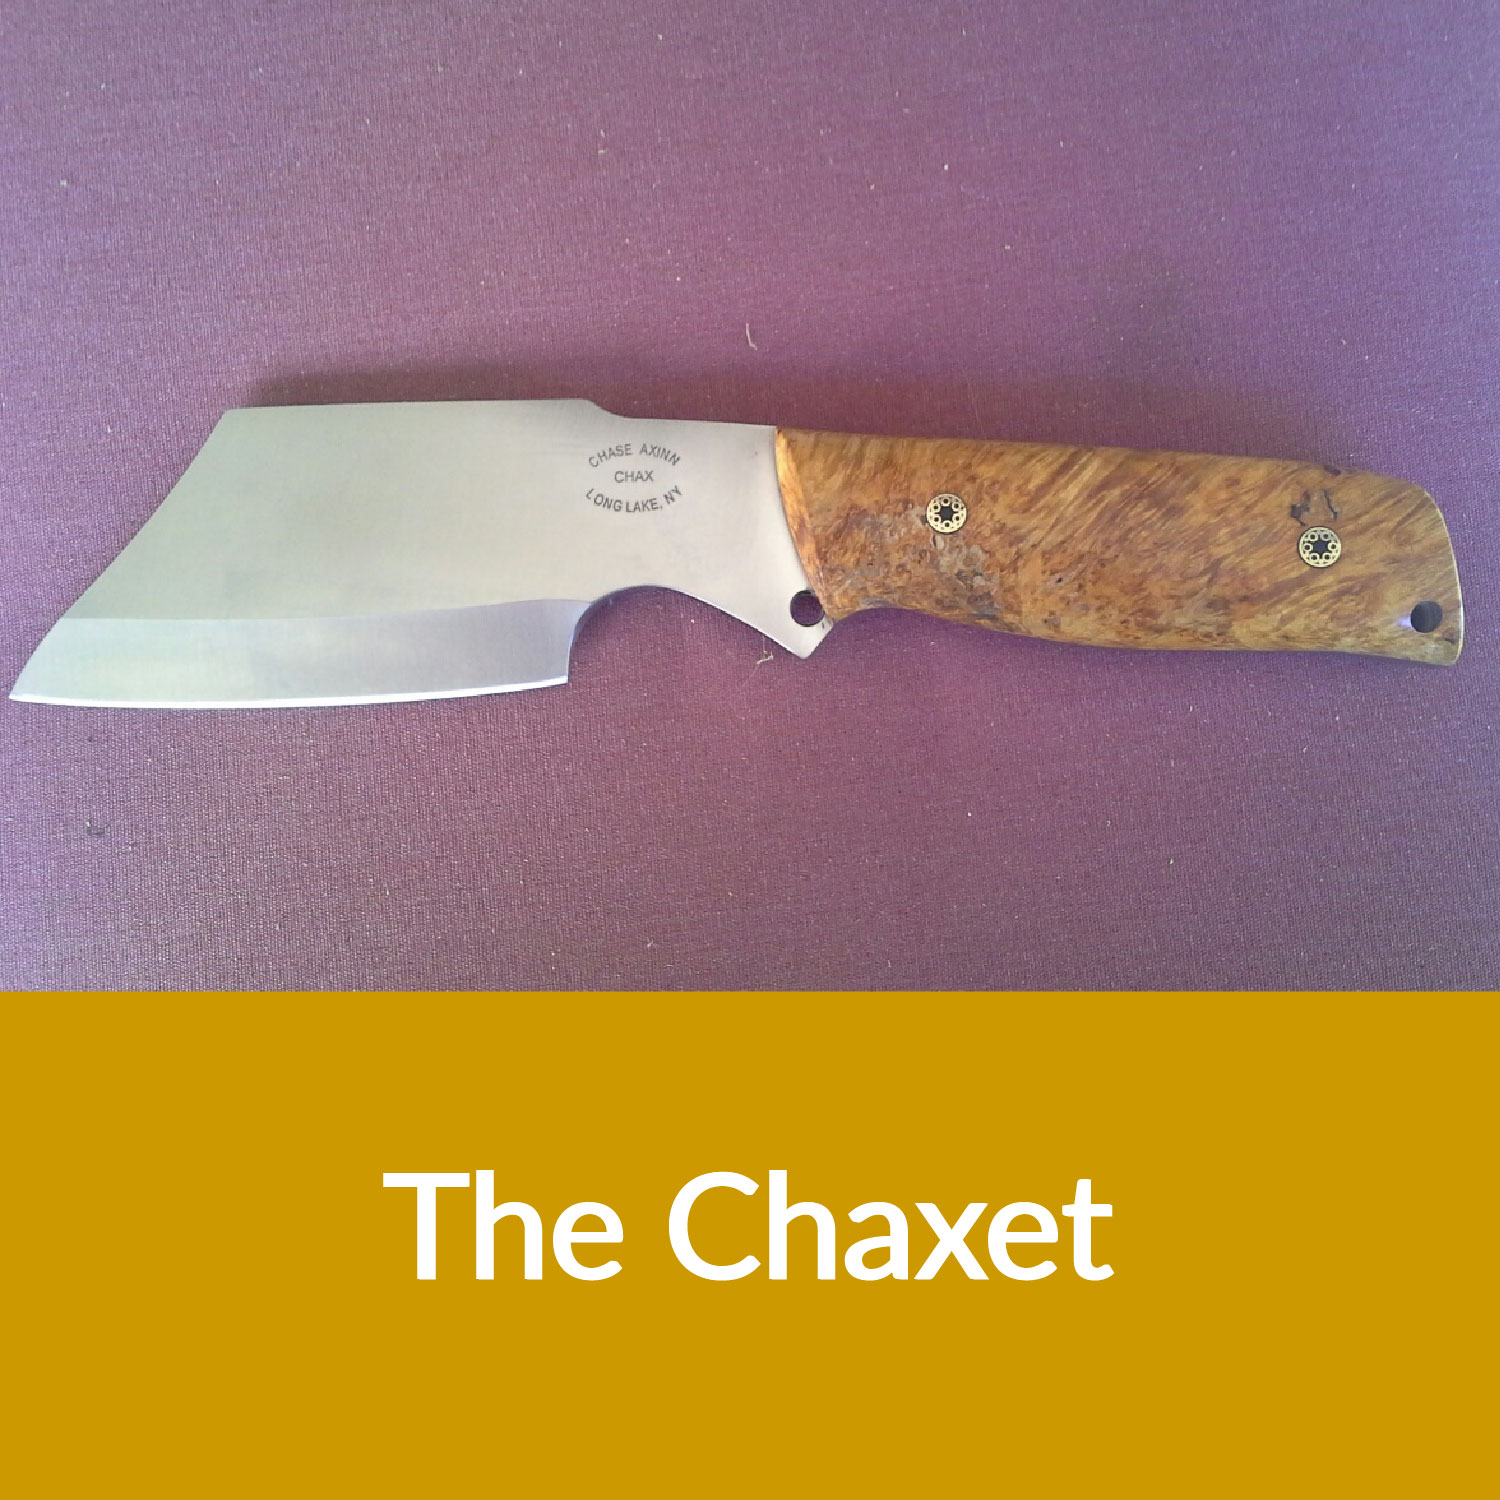 The Chaxet